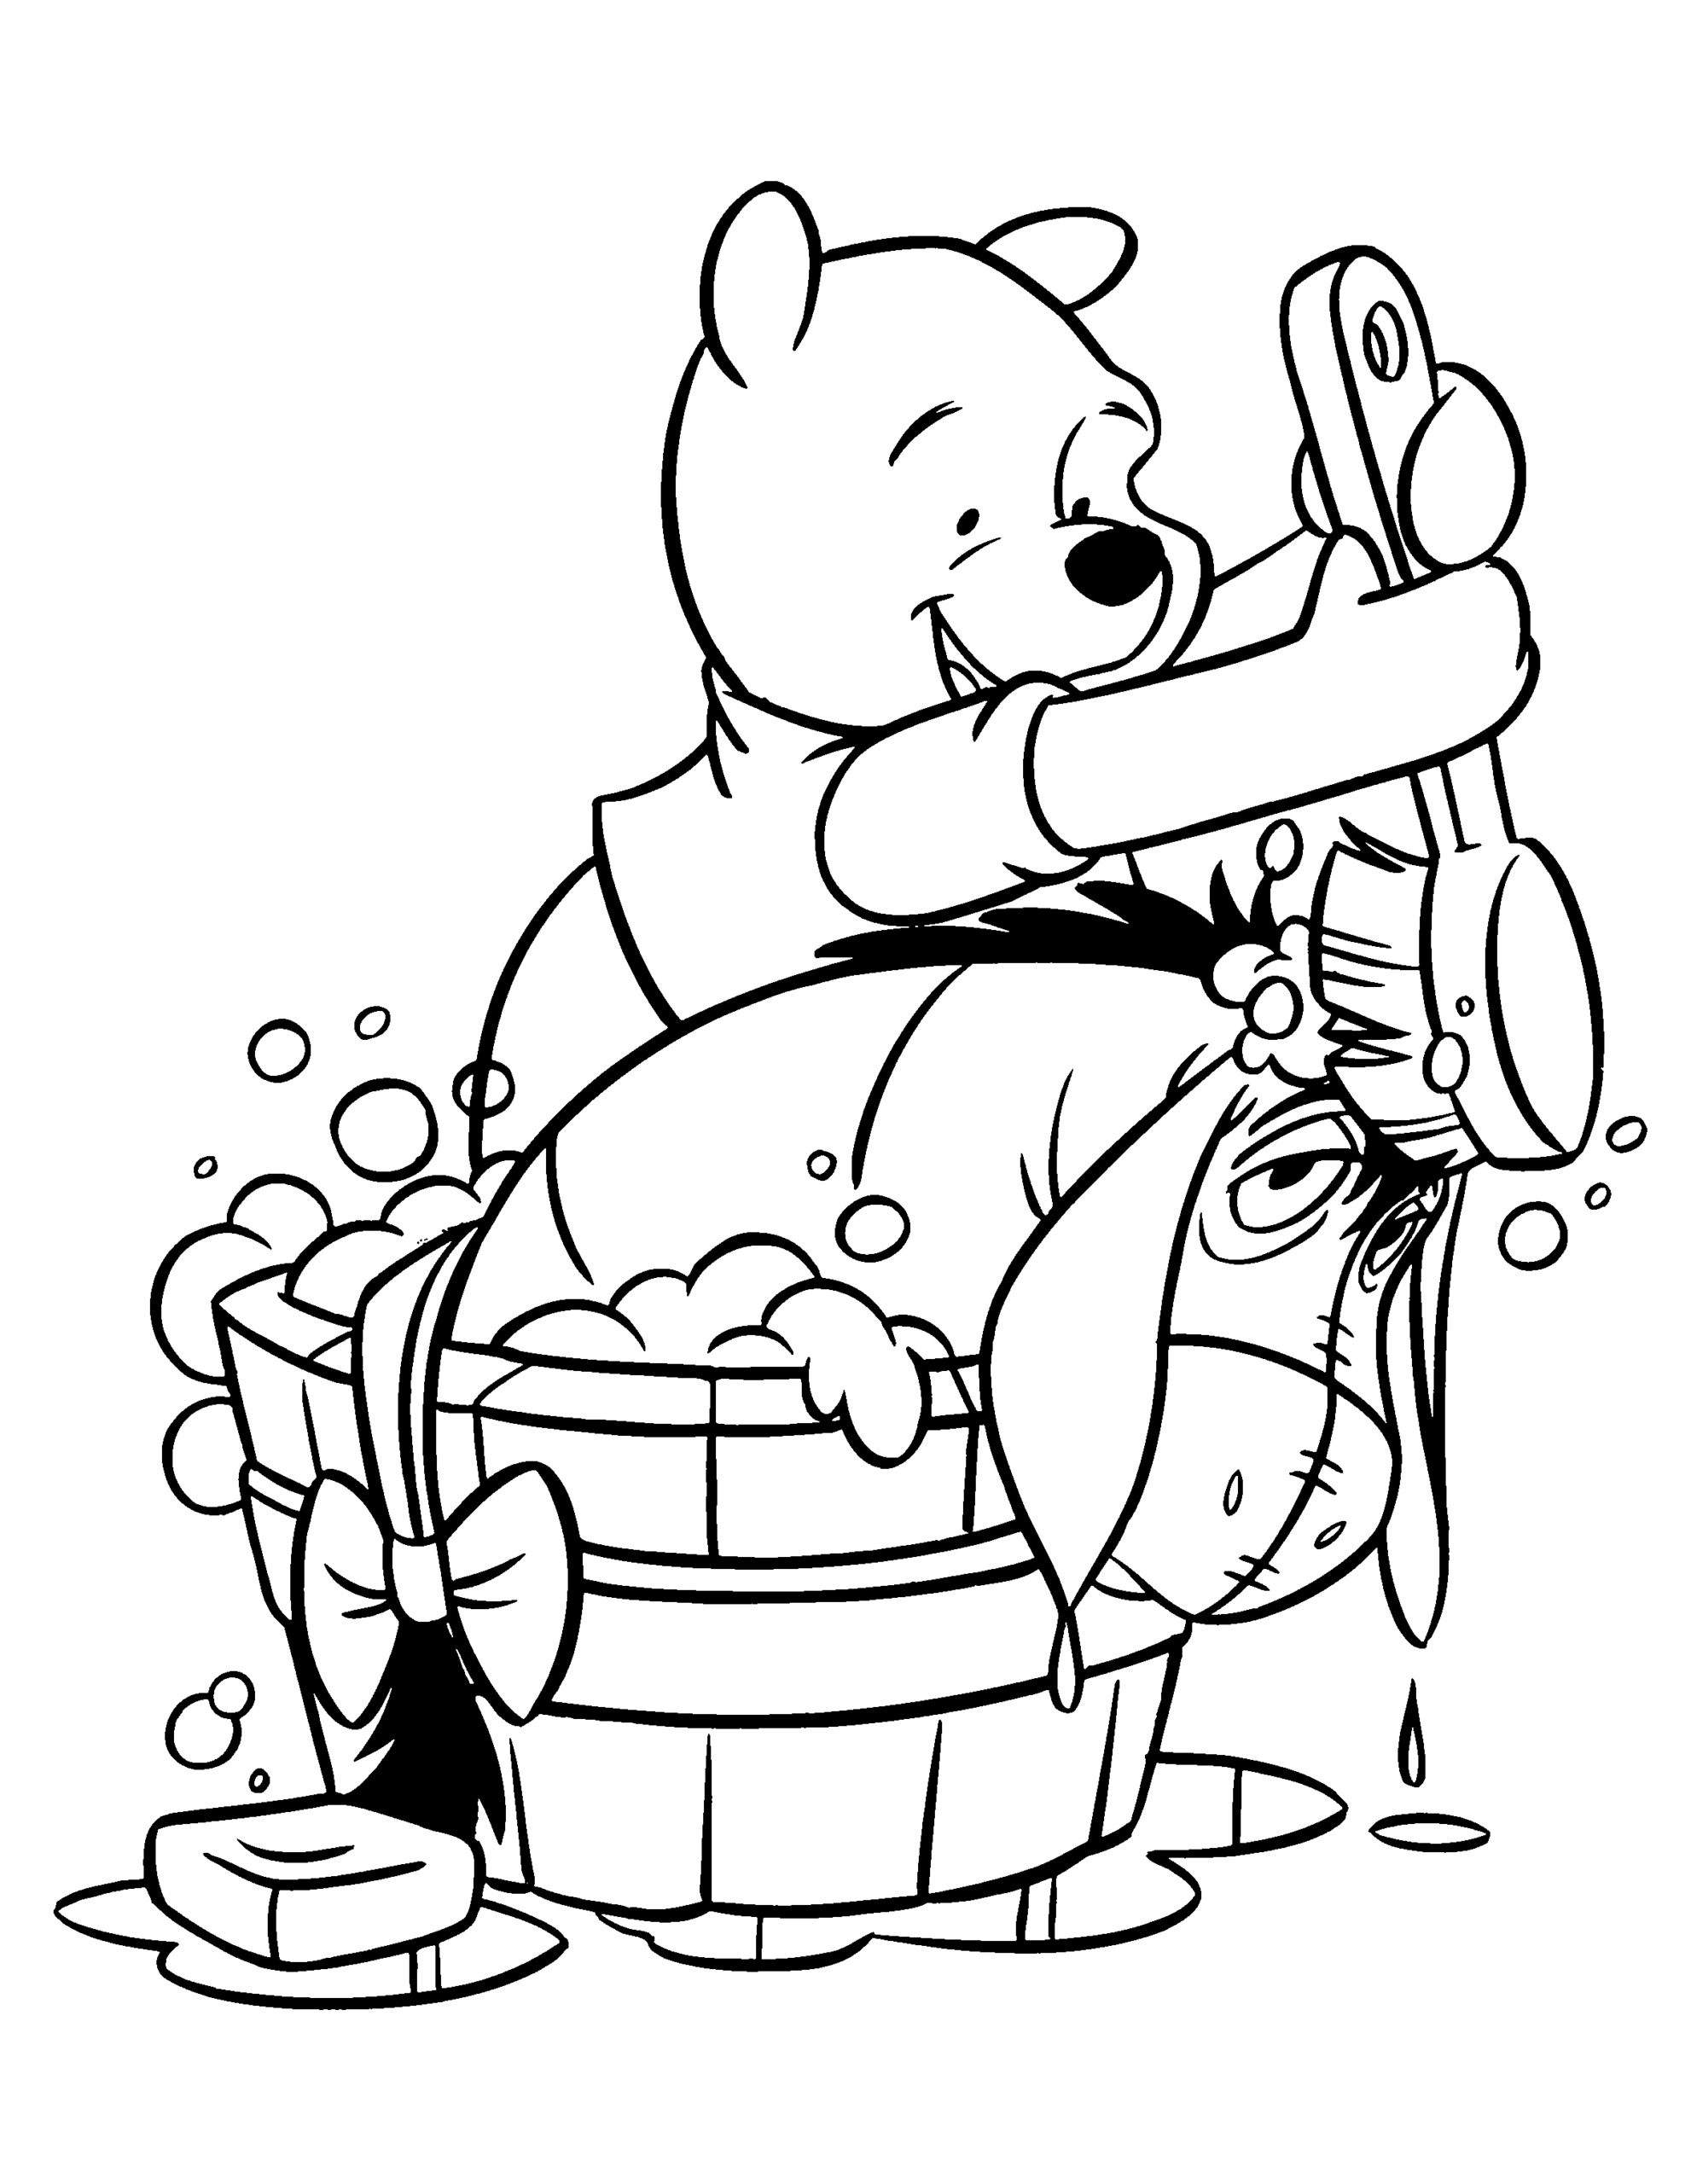 Winnie the Pooh Coloring Pages Cartoons winnie the pooh 120 Printable 2020 7101 Coloring4free